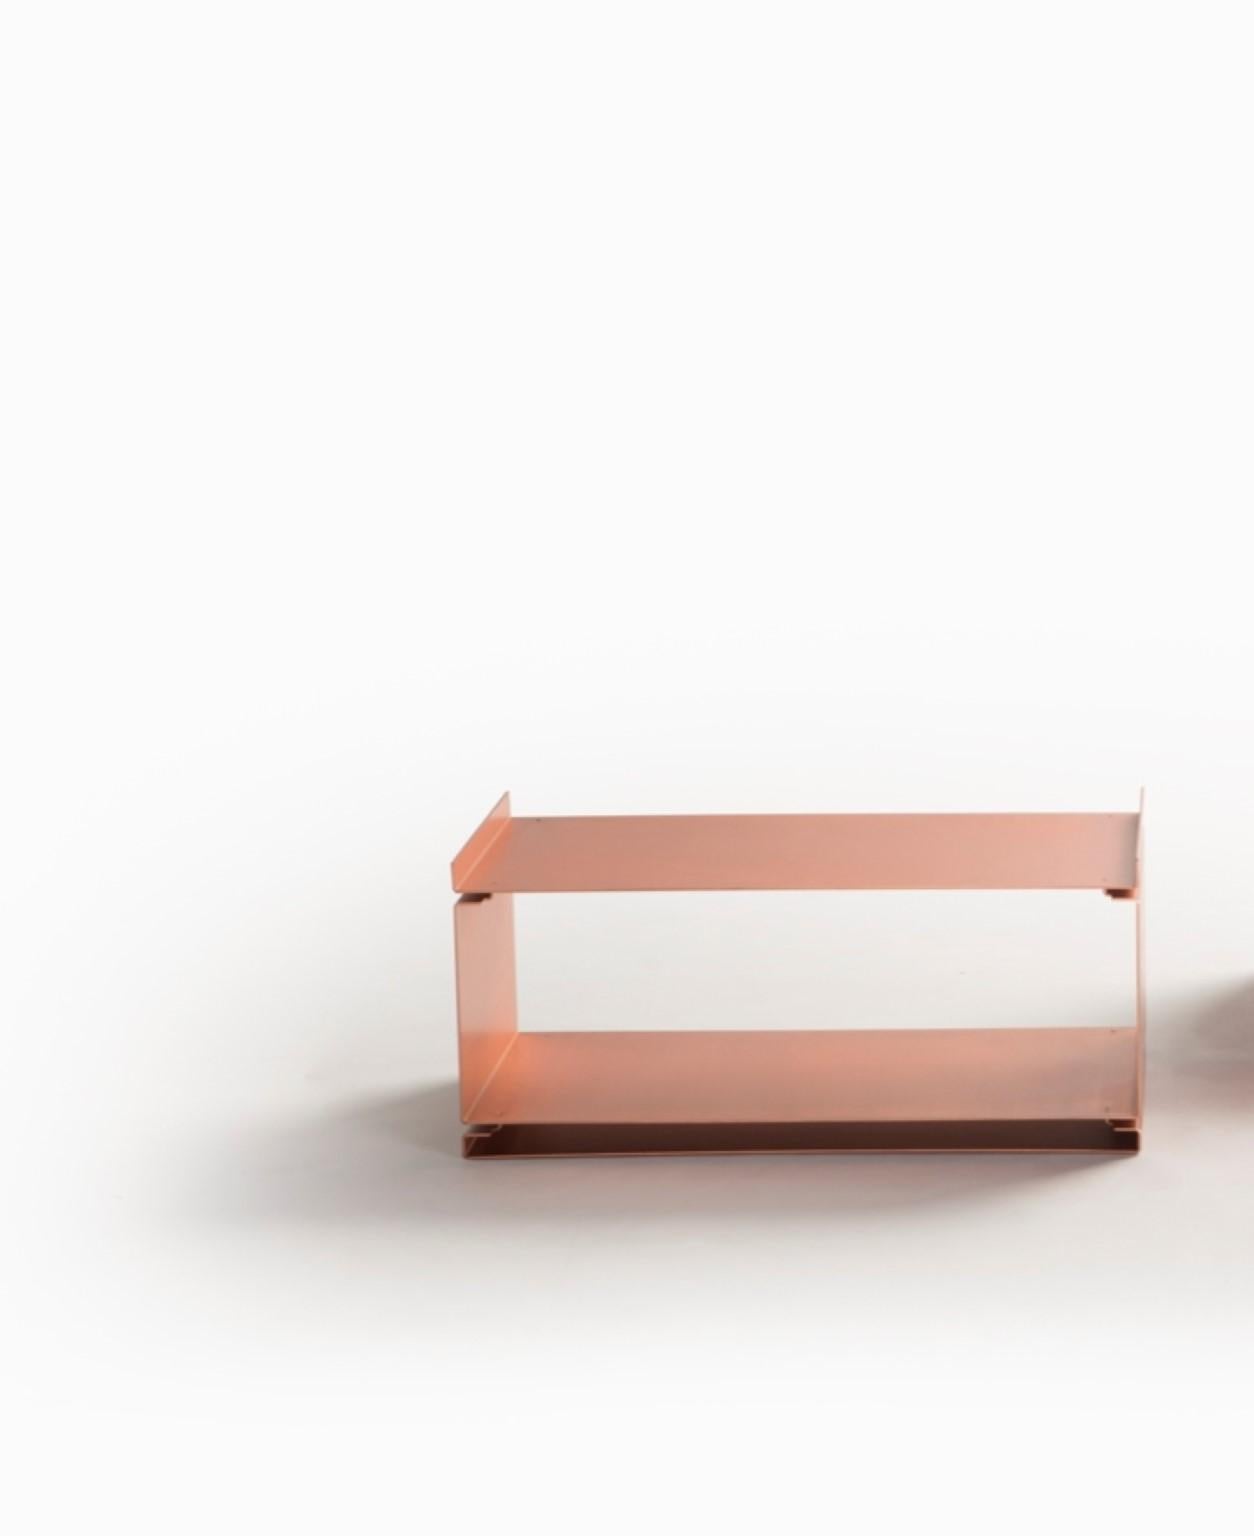 Rose gold coffee table by SEM
Dimensions: W 70 x D 35 x H 30 cm
Material: Polished or fine brushed Rose Gold plated

SEM is a new brand of home furnishings, designed and produced in Italy. The preview show at Milan Design Week 2018 represents an